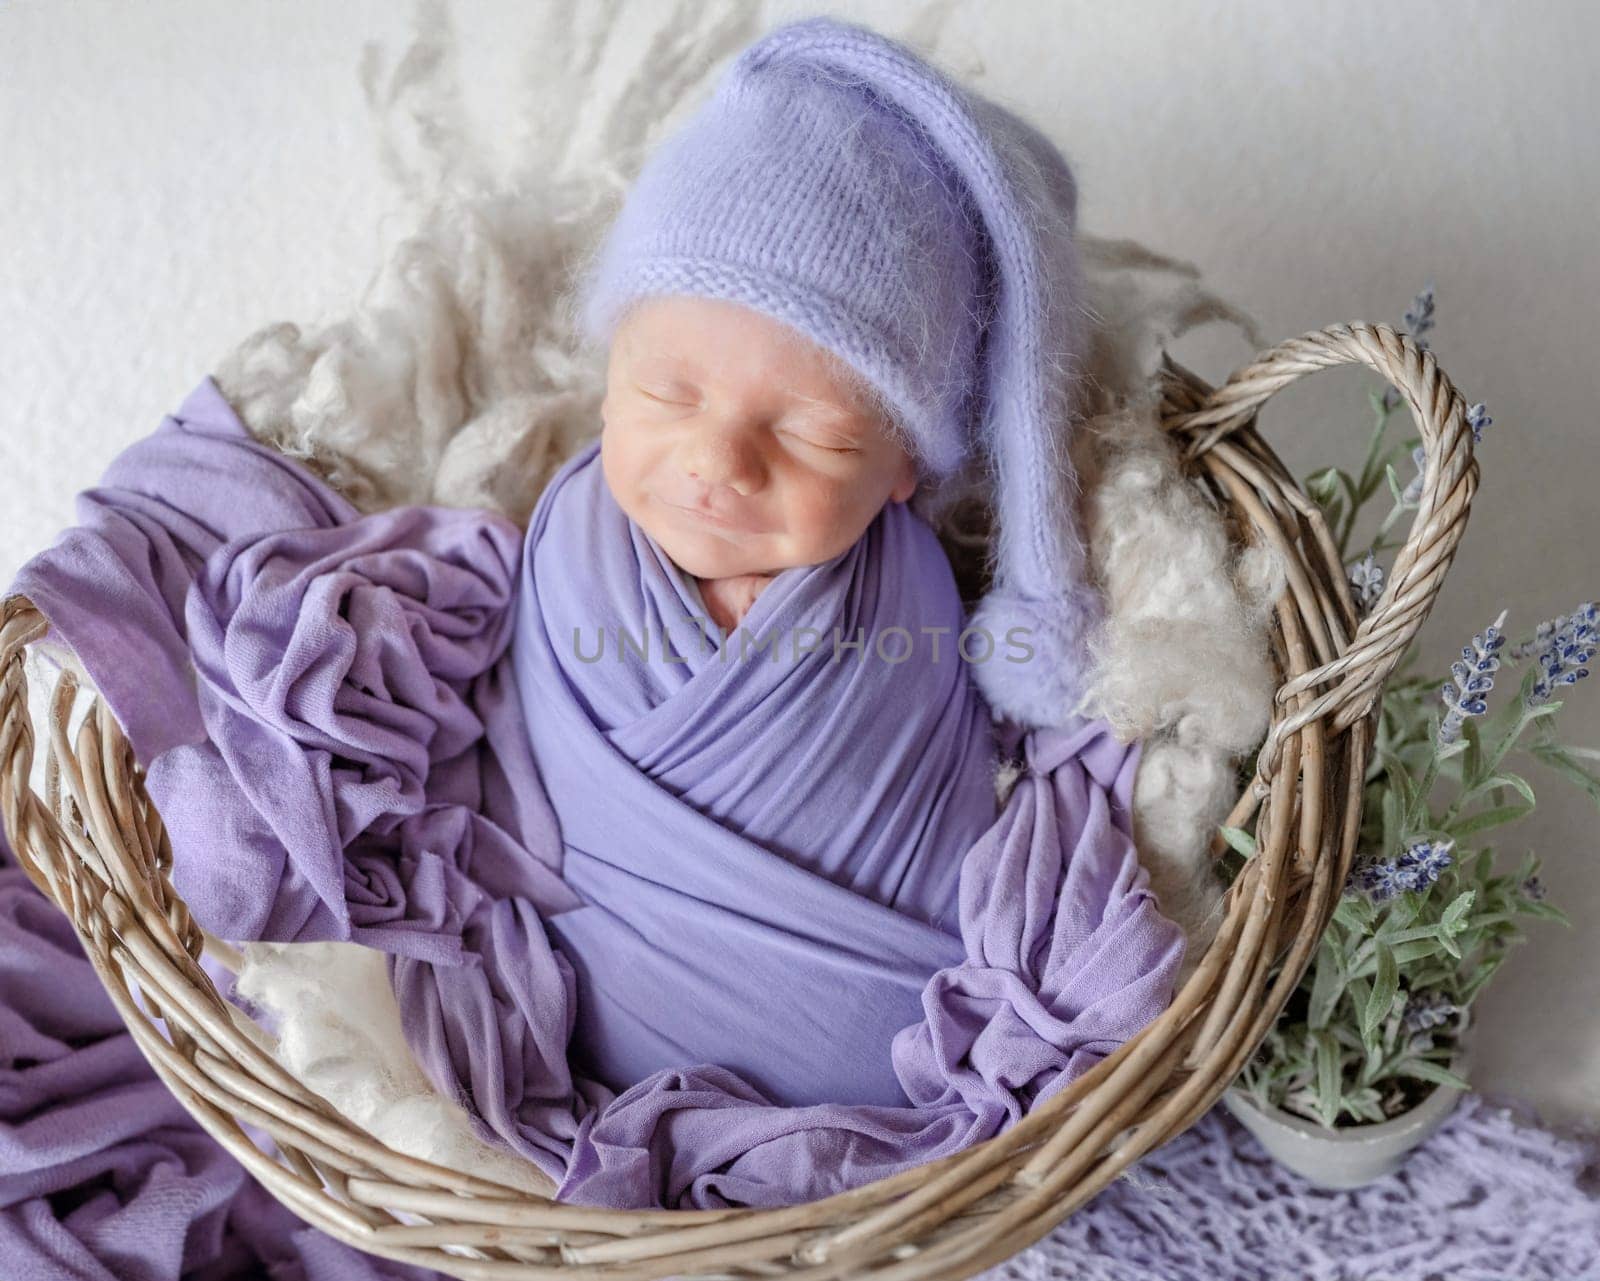 Newborn Baby Wrapped In Lavender Sleeps In A Basket During A Studio Photoshoot